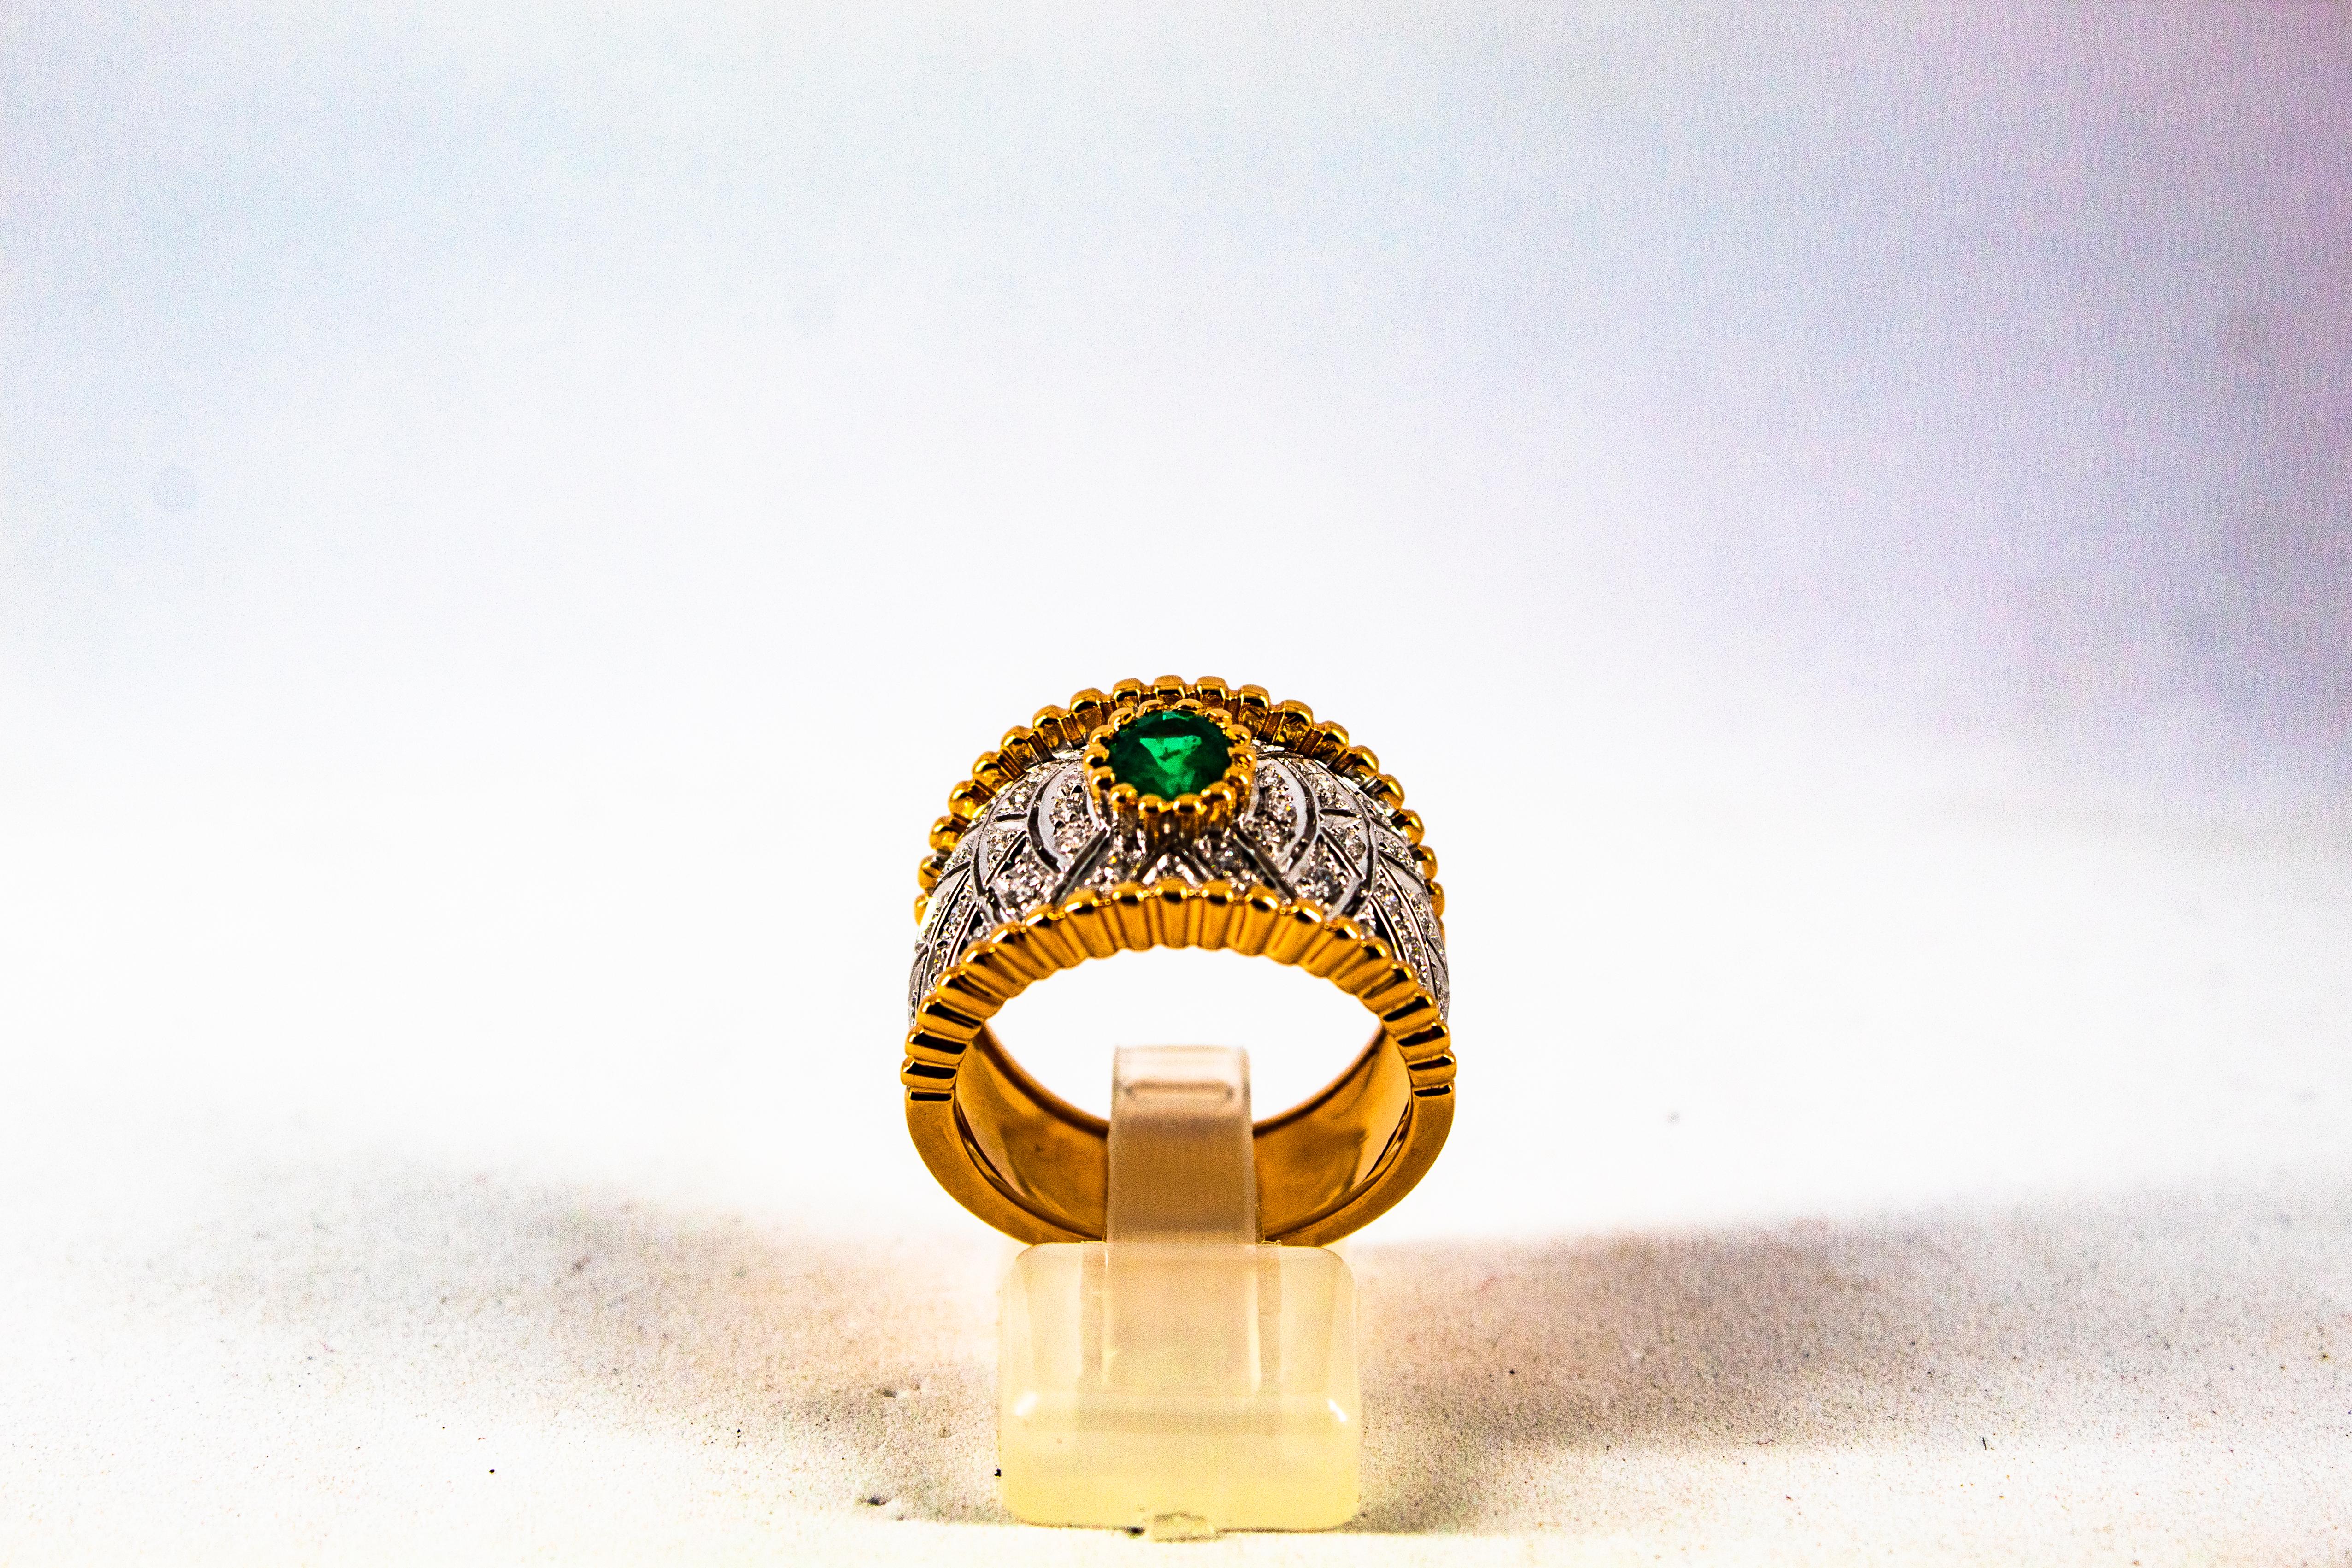 This Ring is made of 14K Yellow Gold.
This Ring has 0.50 Carats of White Modern Round Cut Diamonds.
This Ring has a 0.60 Carats Natural Oval Cut Emerald.
This Ring is available also with a central Ruby or Blue Sapphire.

Size ITA: 18 USA: 8